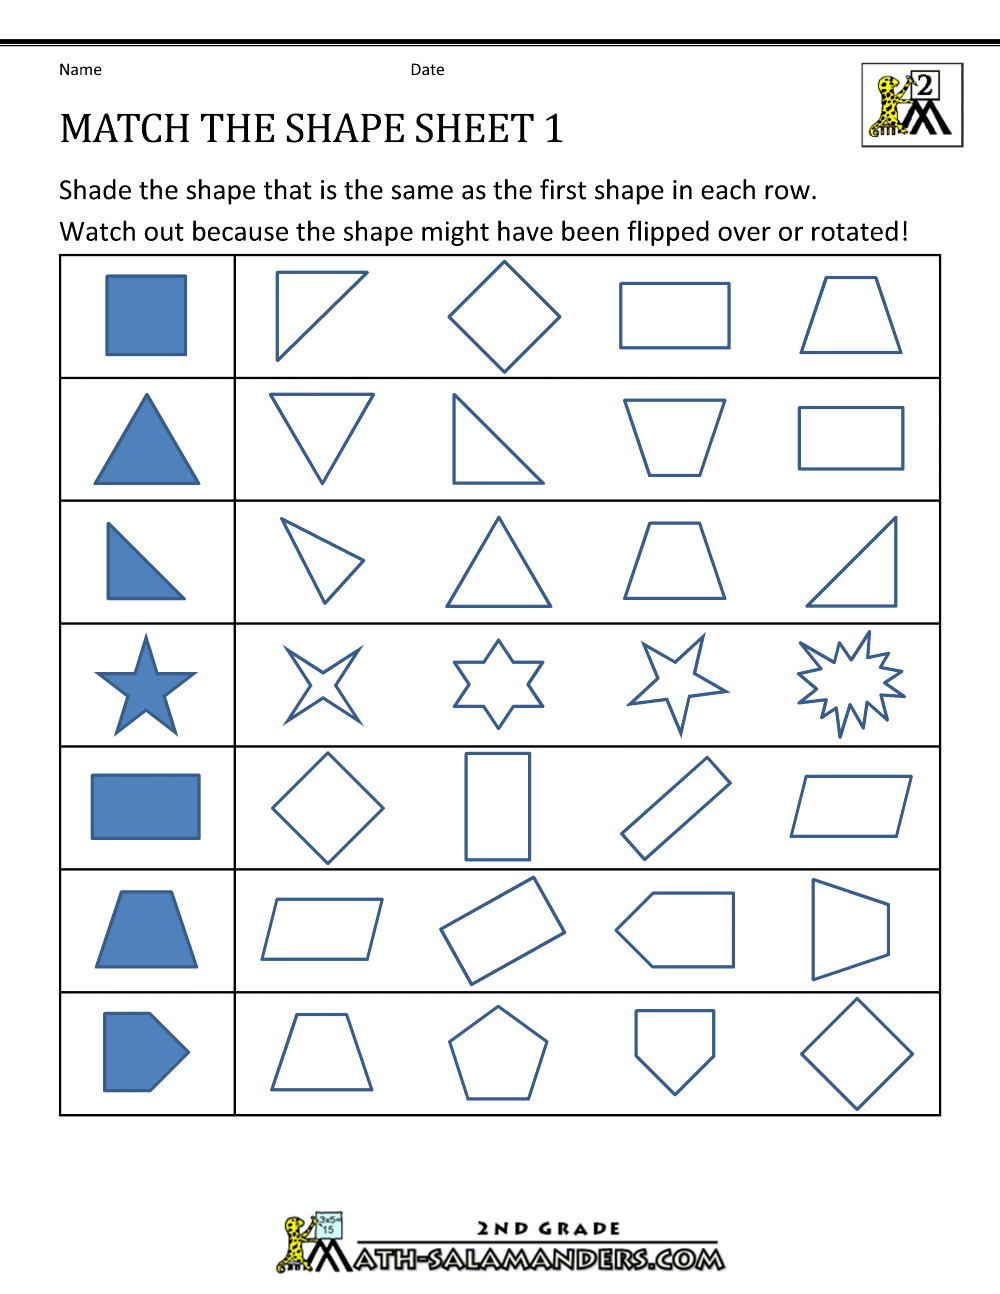 maths-worksheets-for-grade-1-shapes-my-daughter-s-first-grade